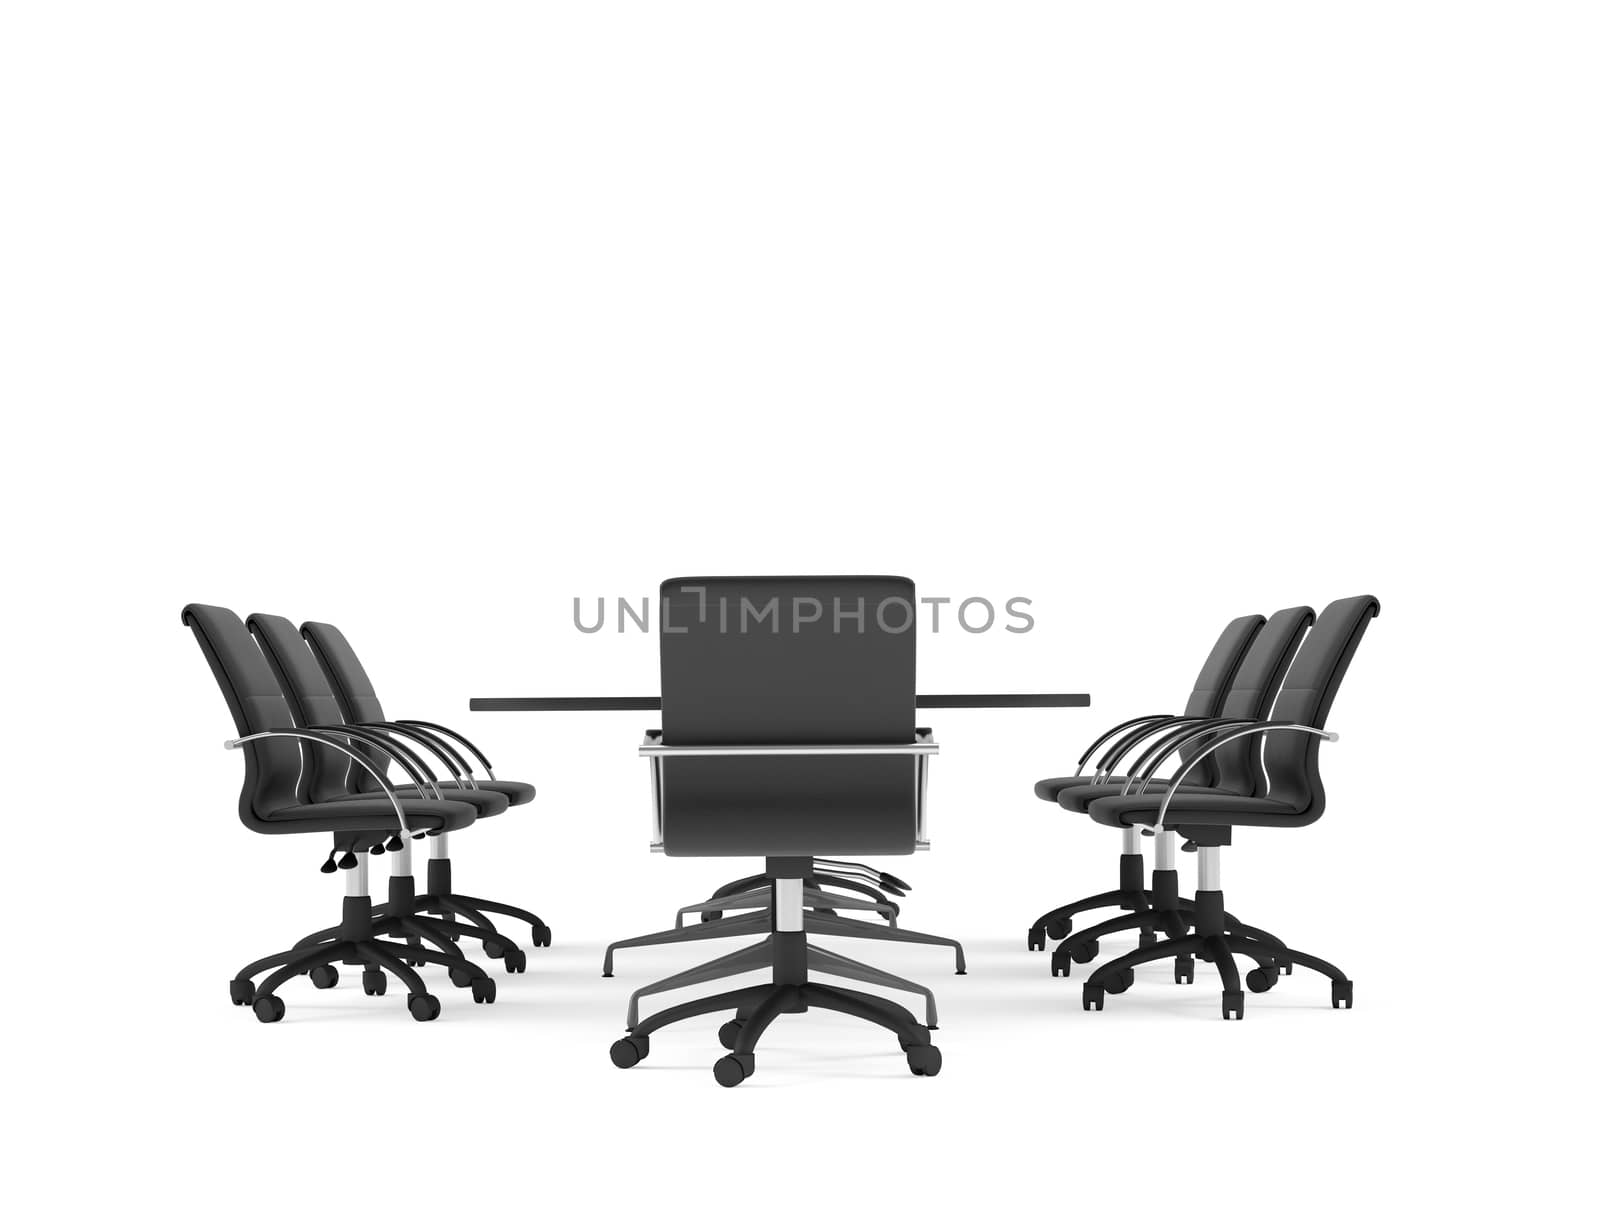 Conference table and office chairs. Isolated render on white background